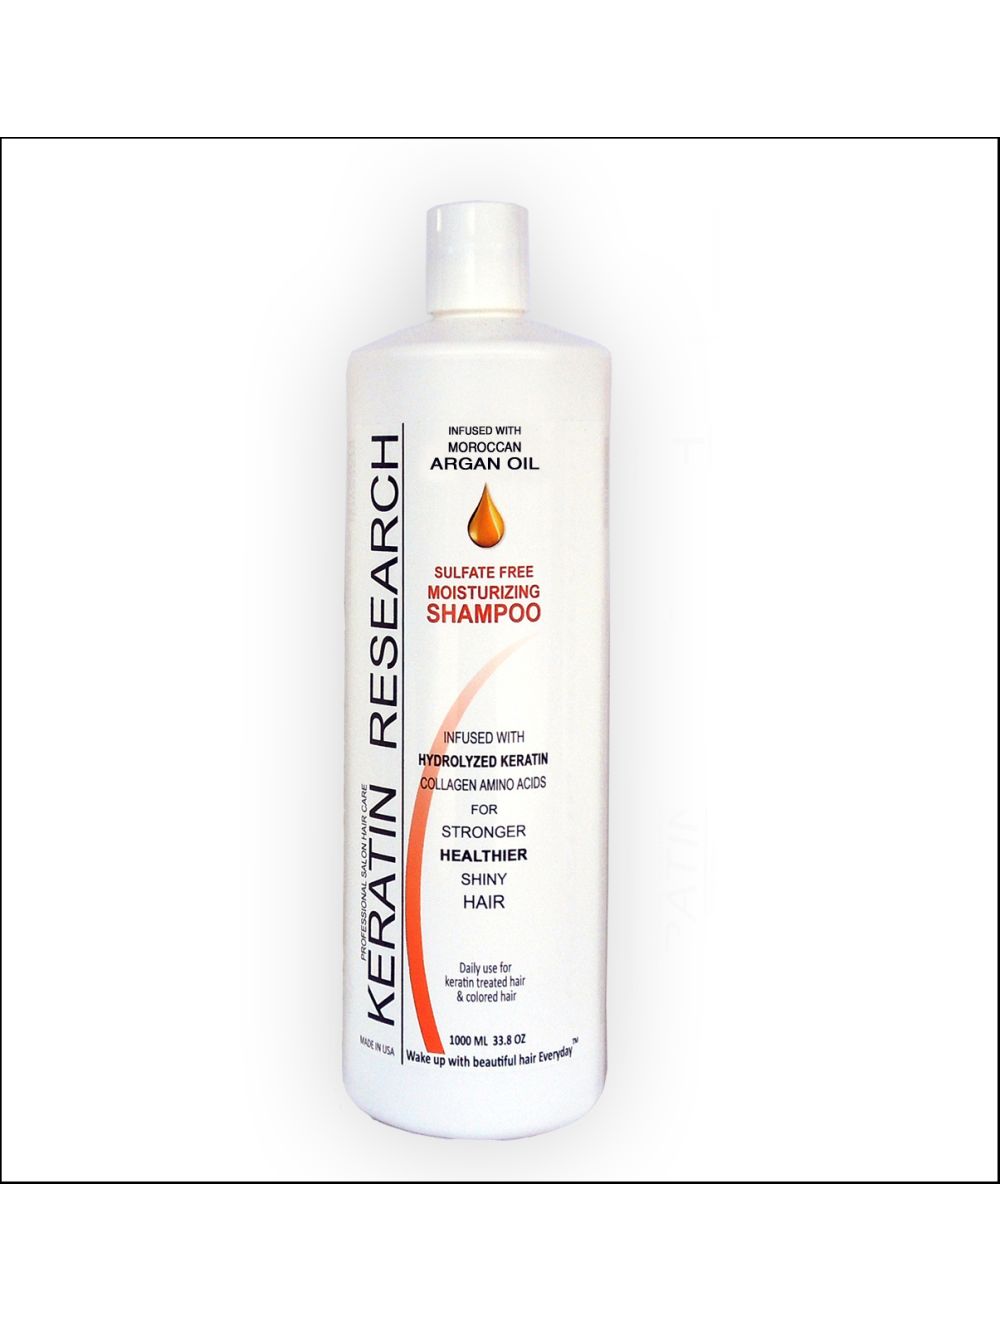 sulfate free shampoo after care system by Keratin Research